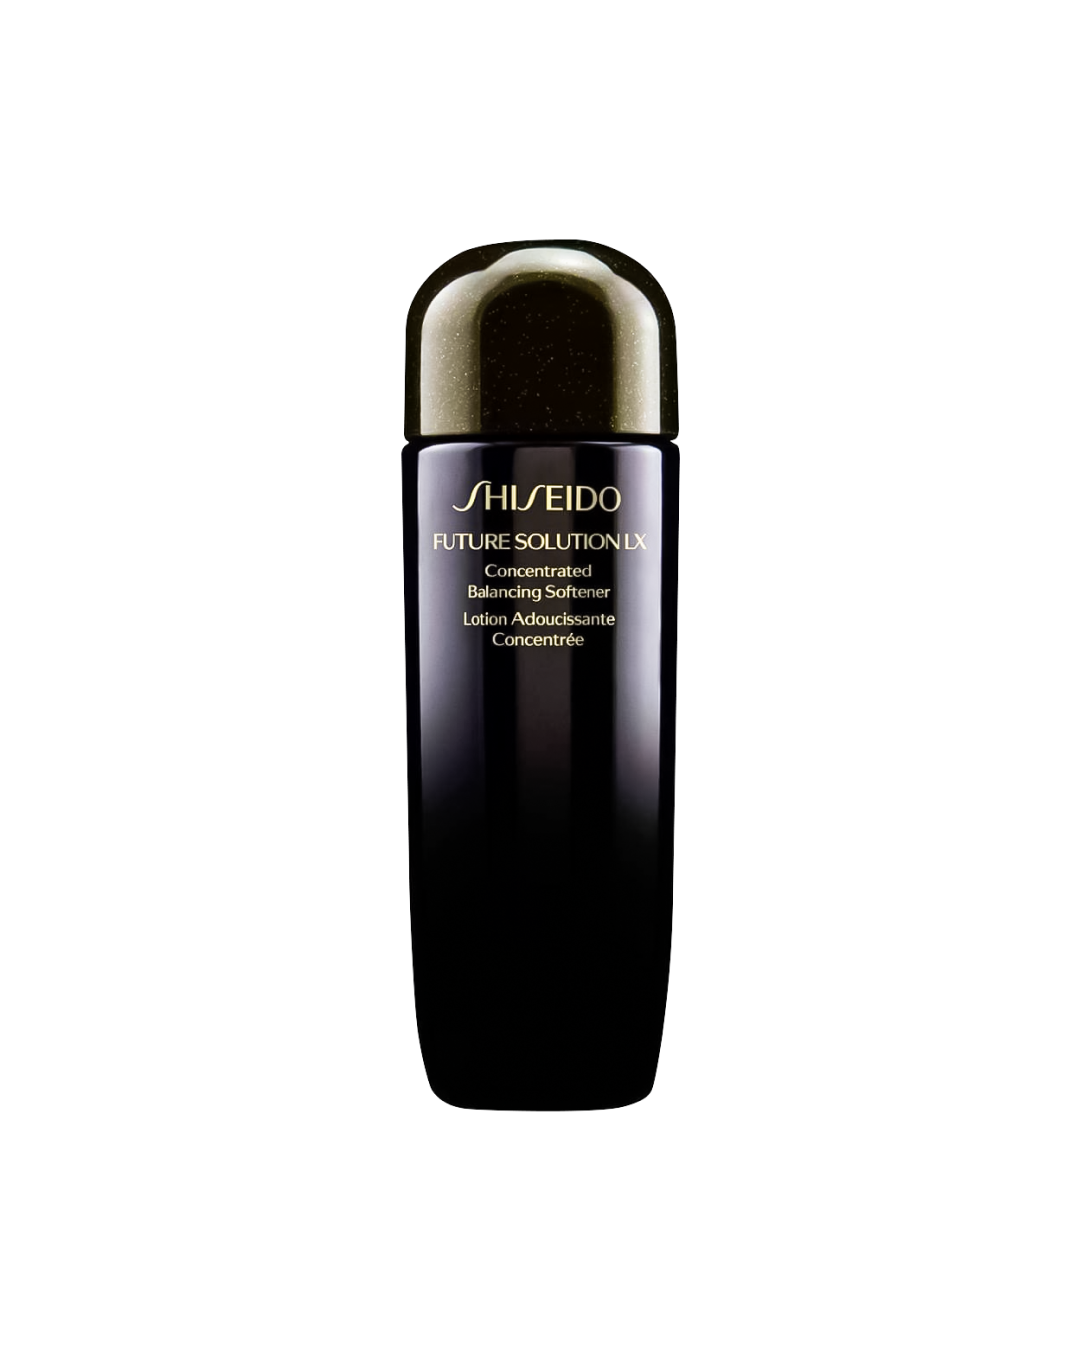 Shiseido FUTURE SOLUTION LX Concentrated Balancing Softener (25ml) - Best Buy World Philippines